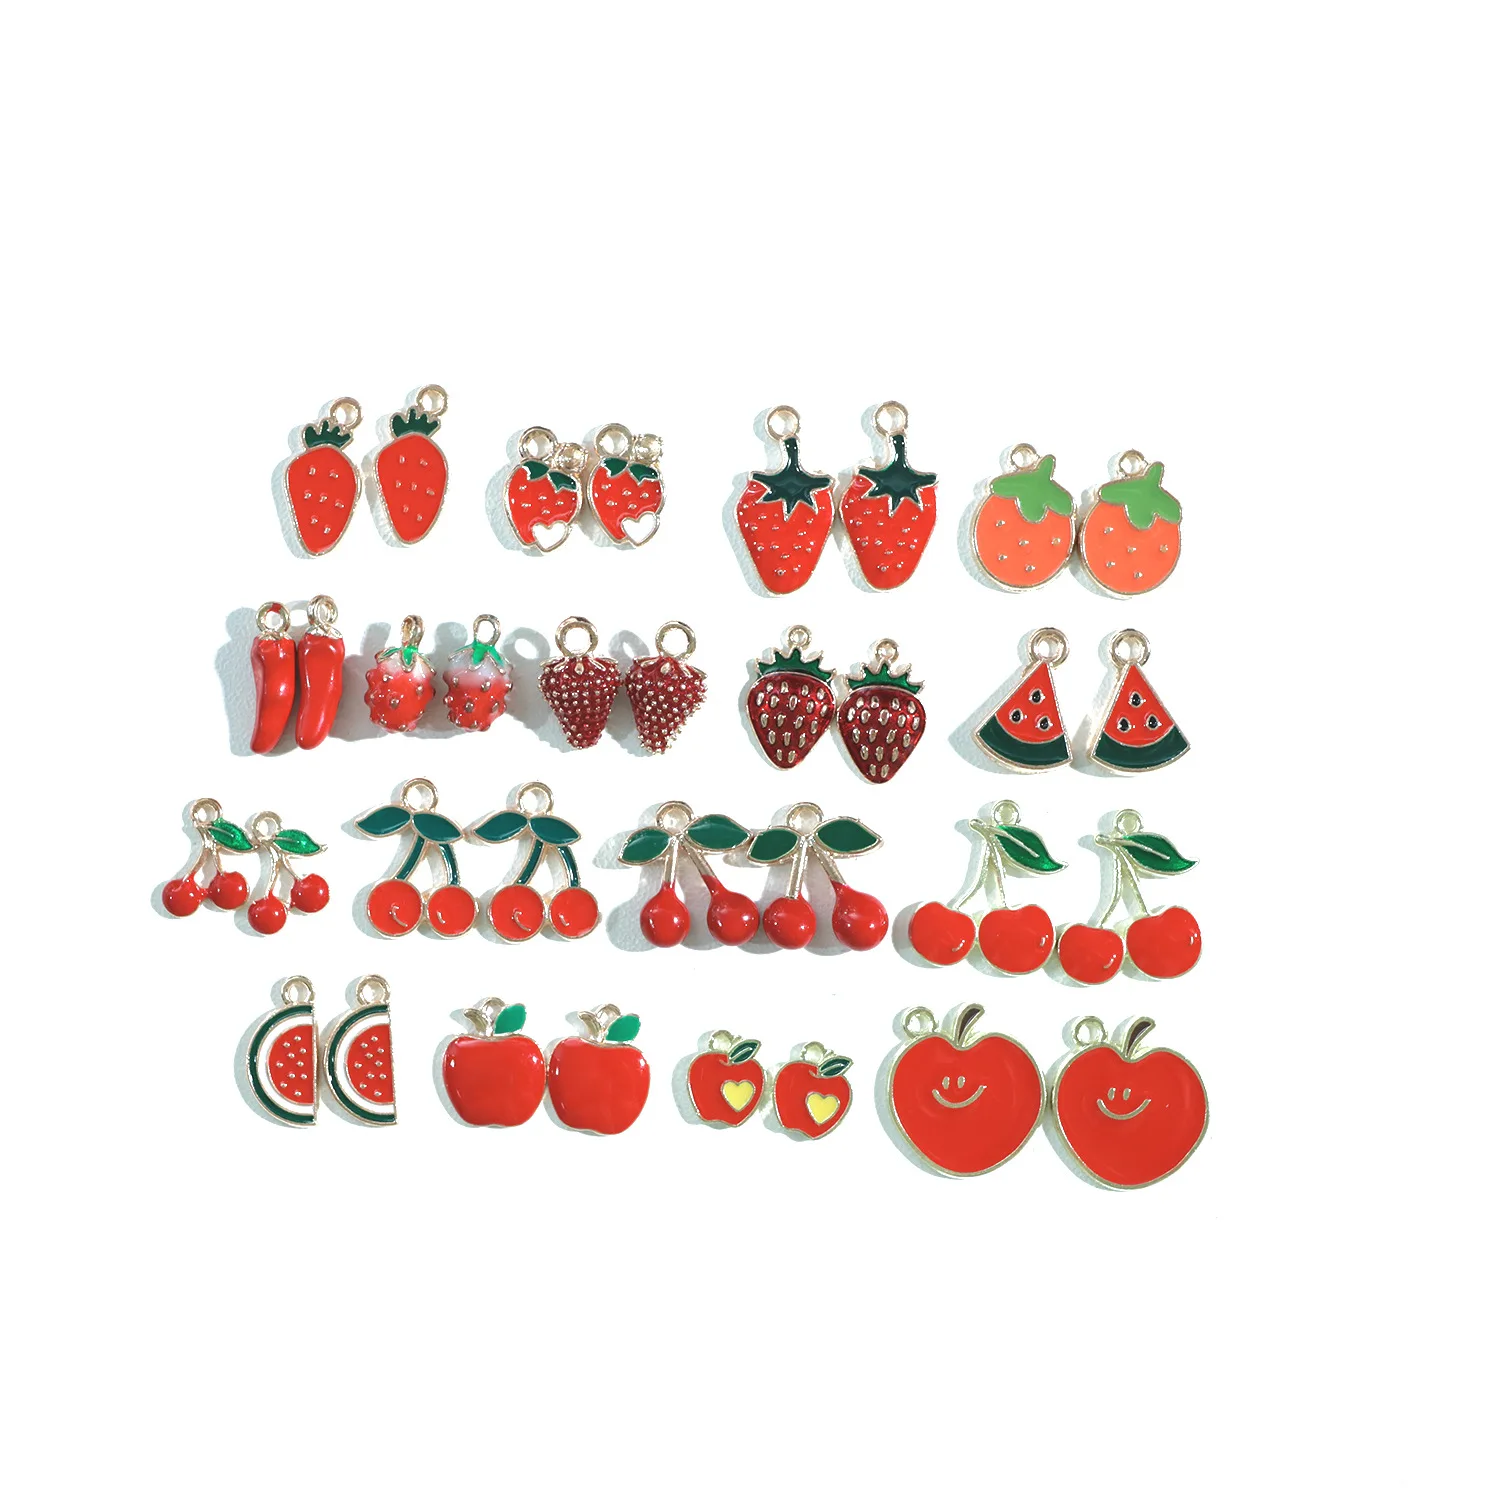 

100PCS Fruits DIY Making Kit Cherry Strawberry Watermelon Pepper Pendants Key Chain Charms Necklace Earring Accessories Jewelry